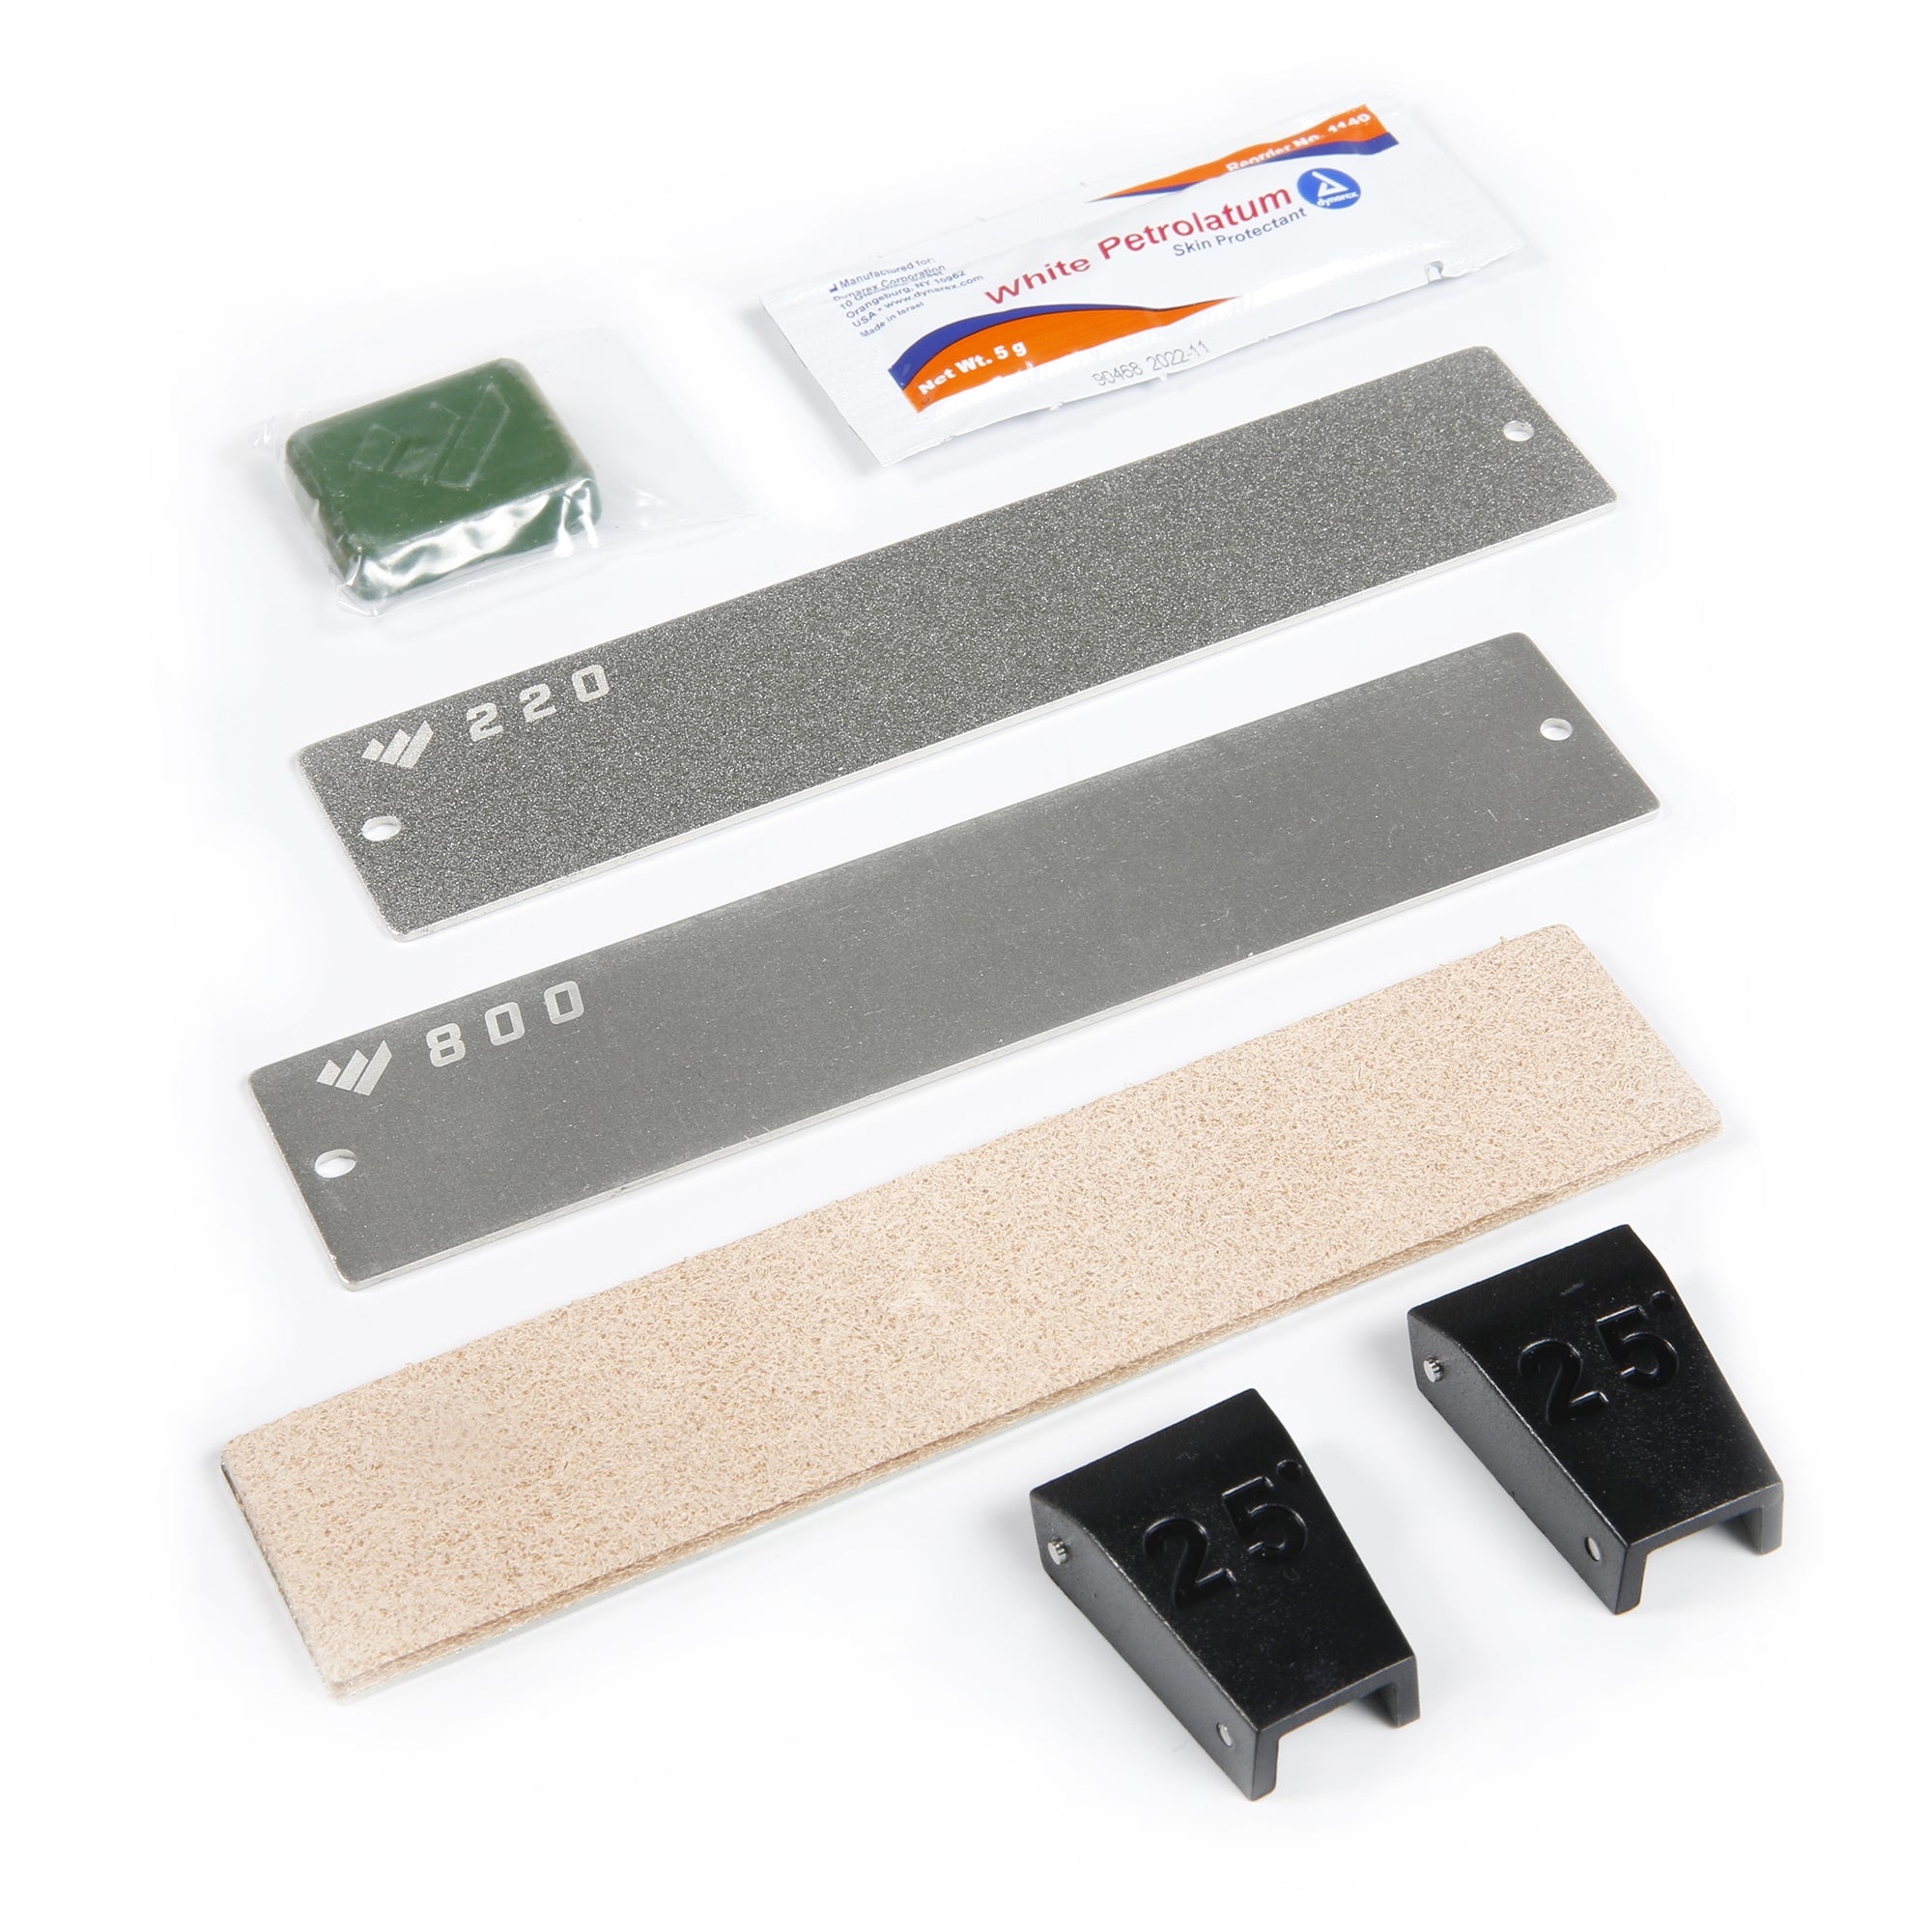 WORK SHARP ACCESSORY UPGRADE KIT for GUIDED SHARPENING SYSTEM - Northwoods  Wholesale Outlet